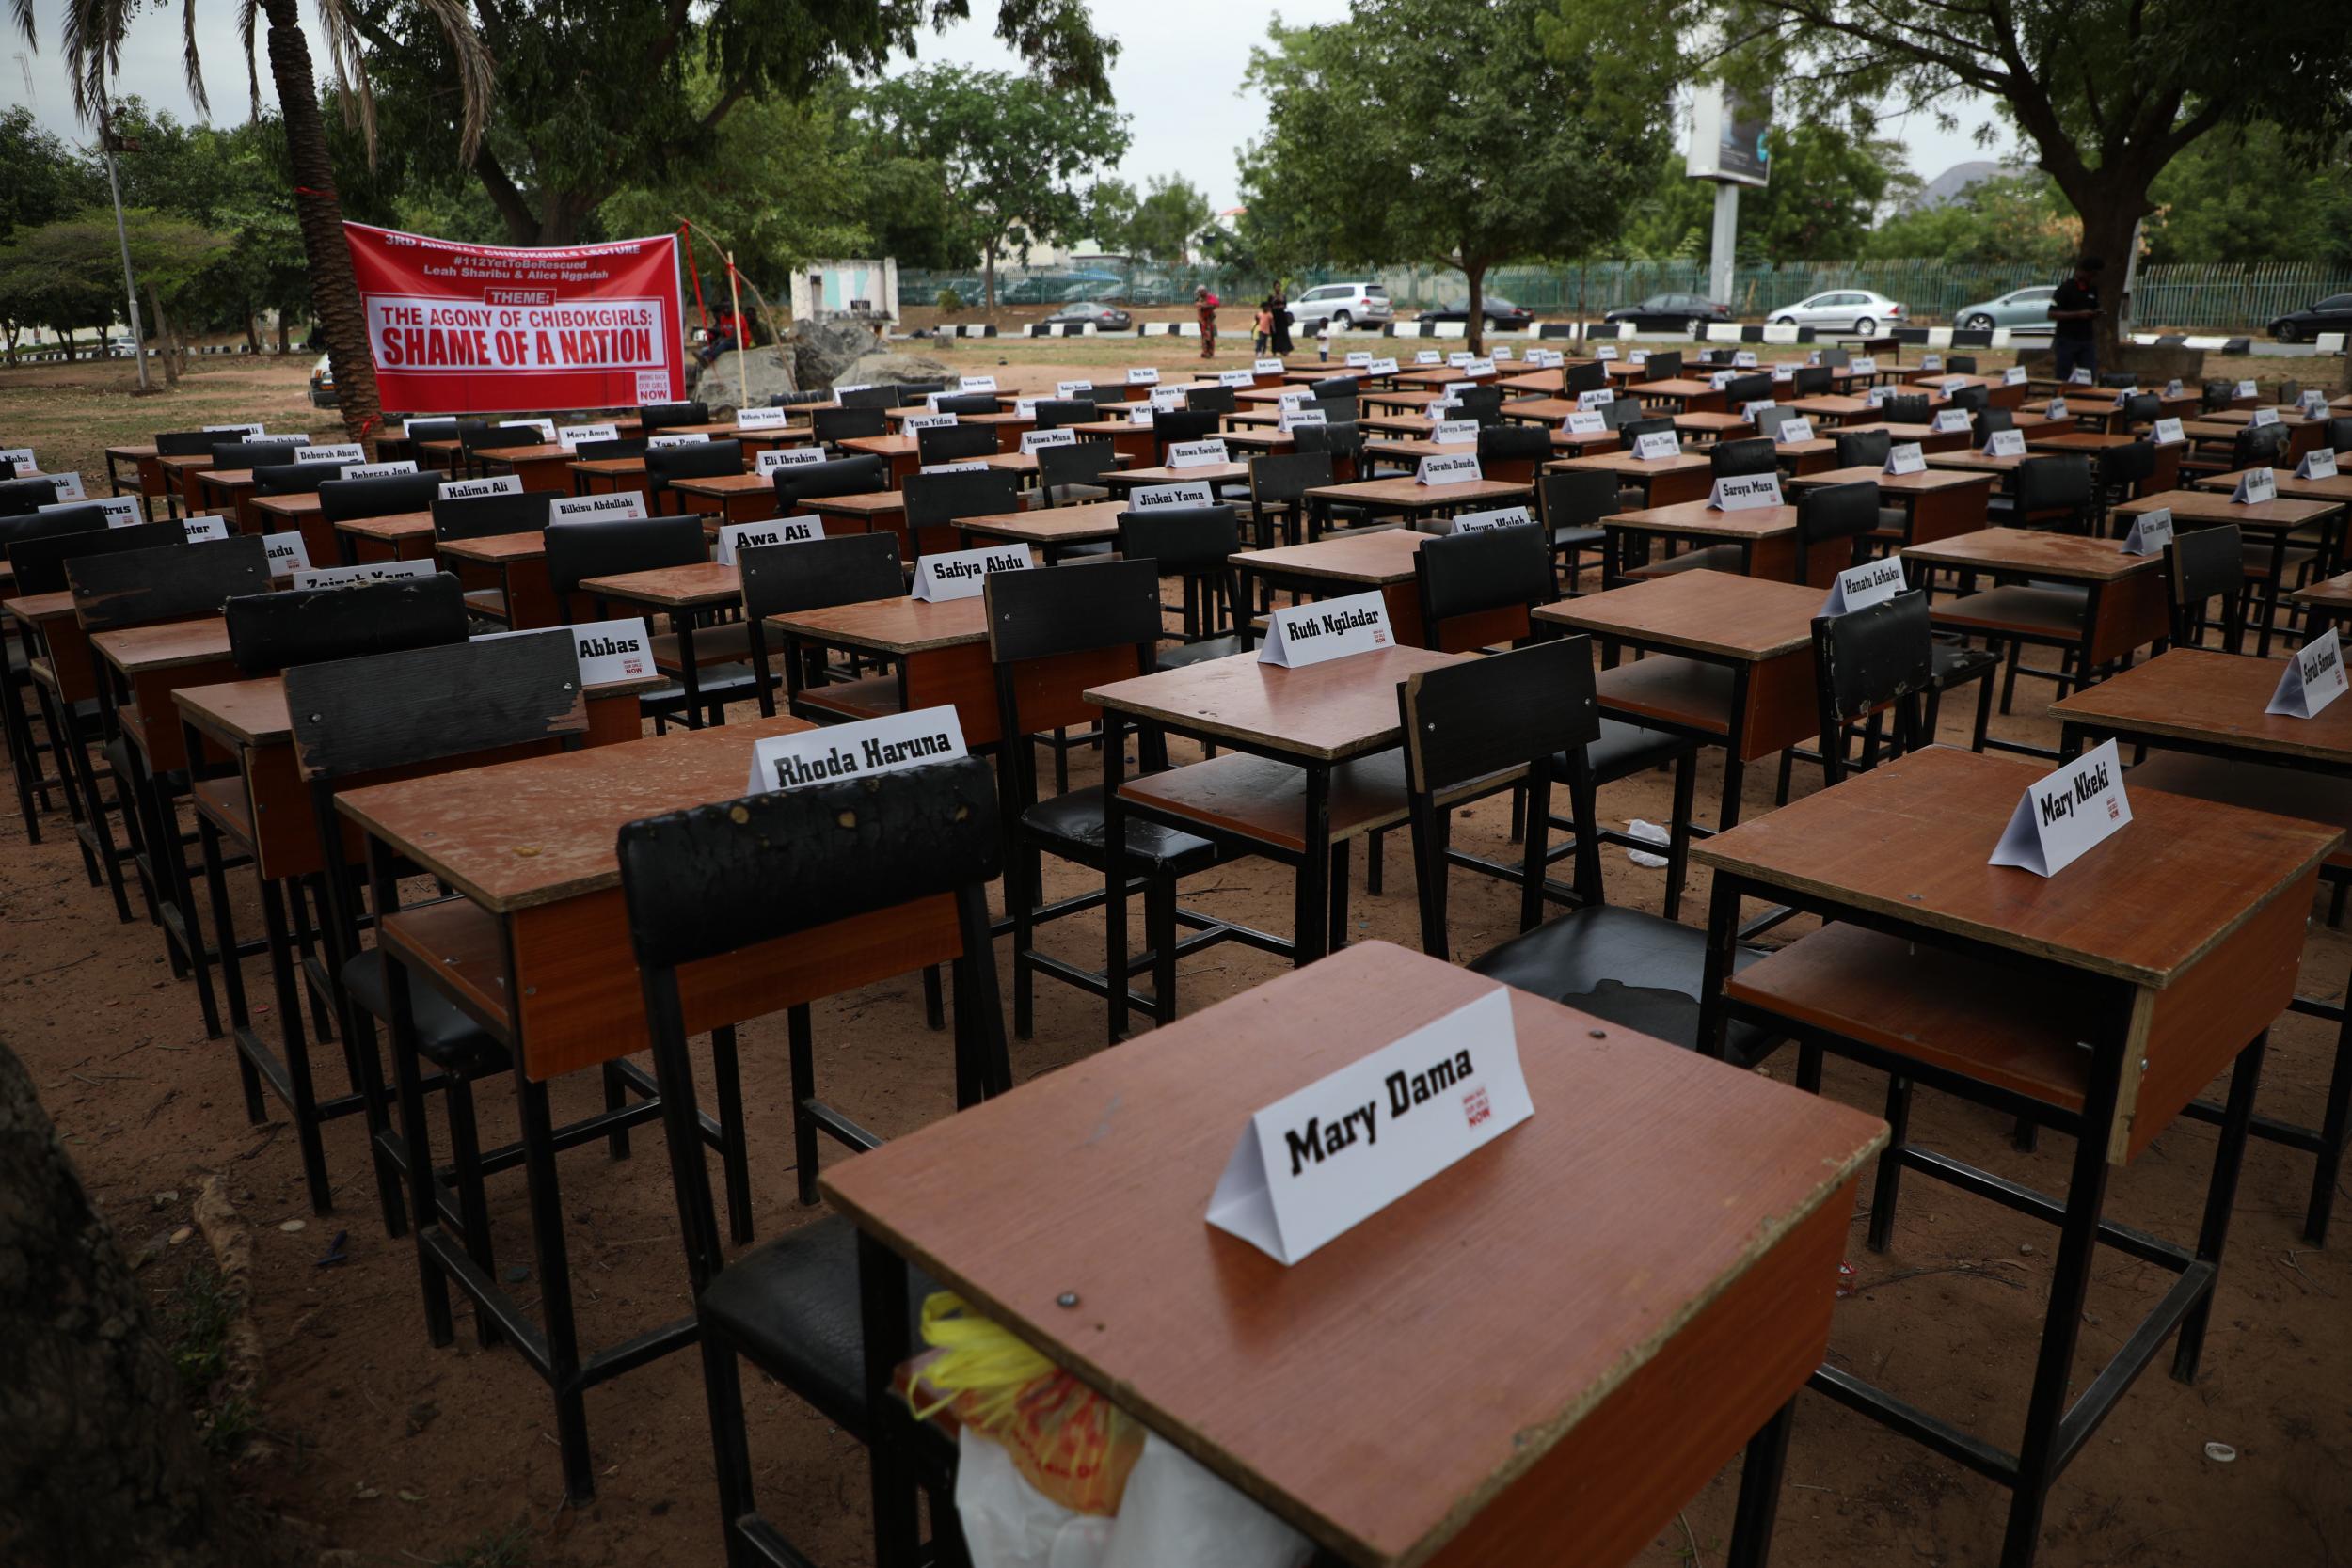 More than 100 schoolgirls were kidnapped from the village of Chibok by Boko Haram